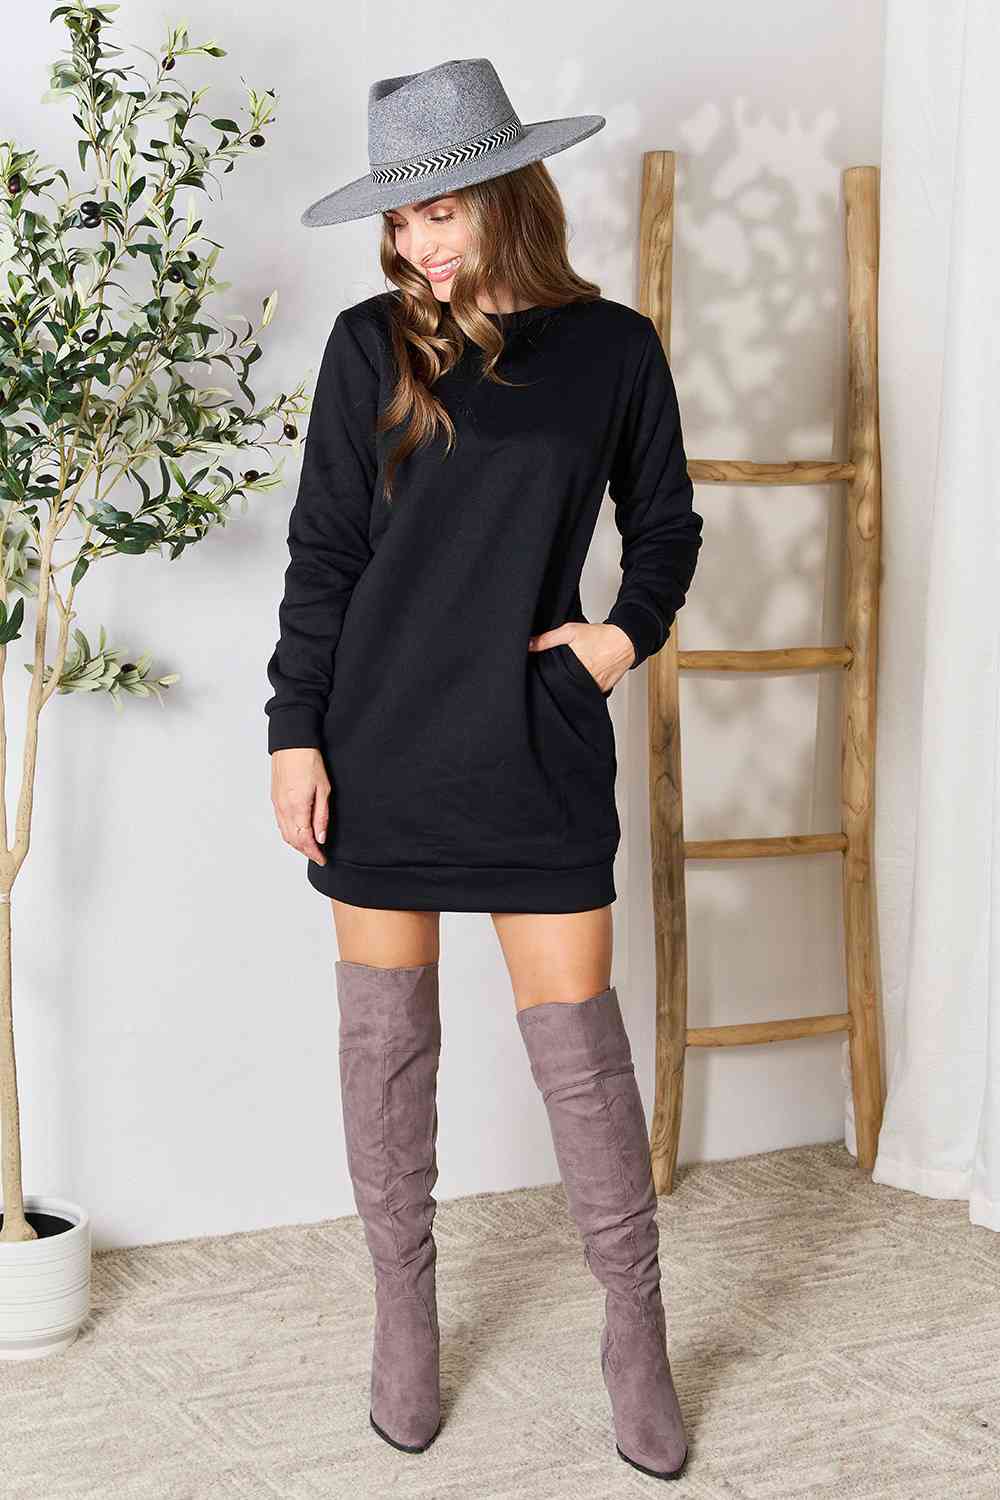 Double Take Round Neck Long Sleeve Mini Dress with Pockets - 2 Colors!